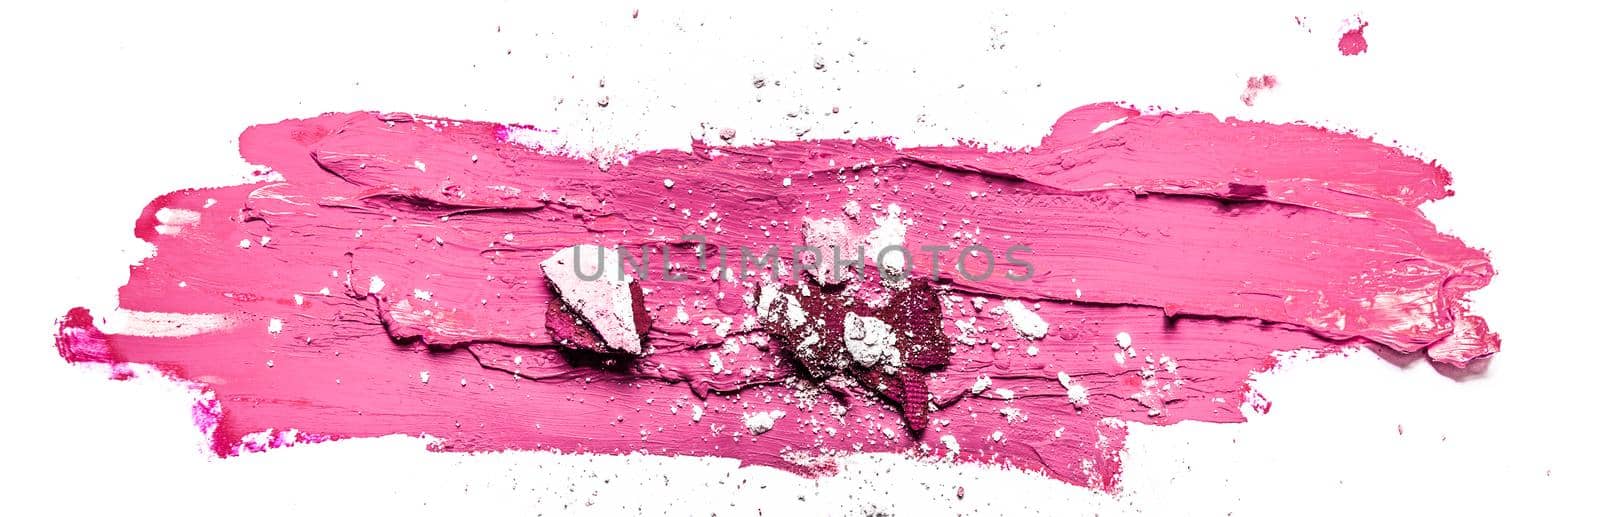 Beauty texture, cosmetic product and art of make-up concept - Artistic lipstick smudge and eyeshadow close-up isolated on white background